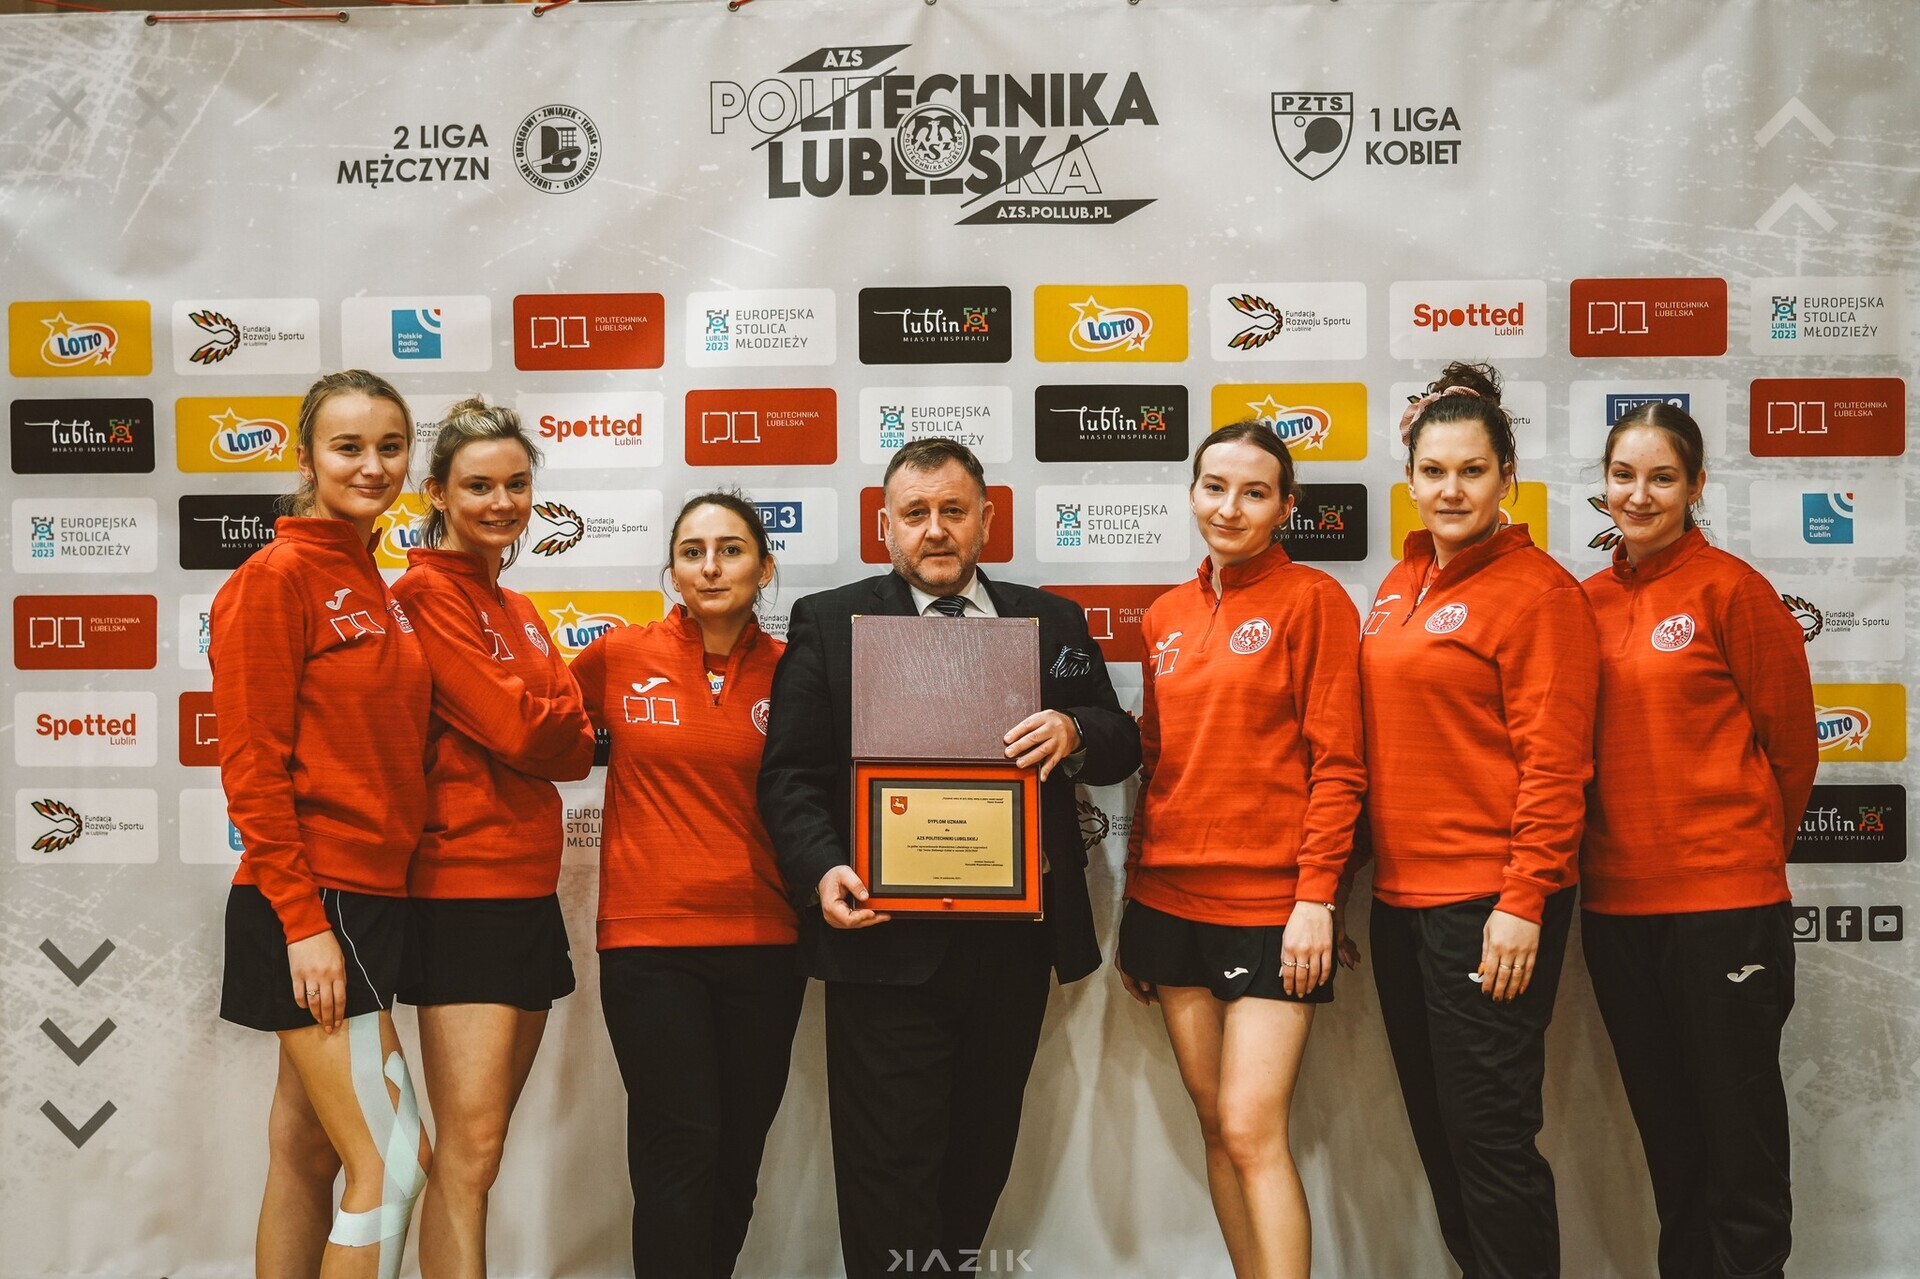 derby_of_lublin_as_part_of_the_1st_womens_table_tennis_league1.jpg